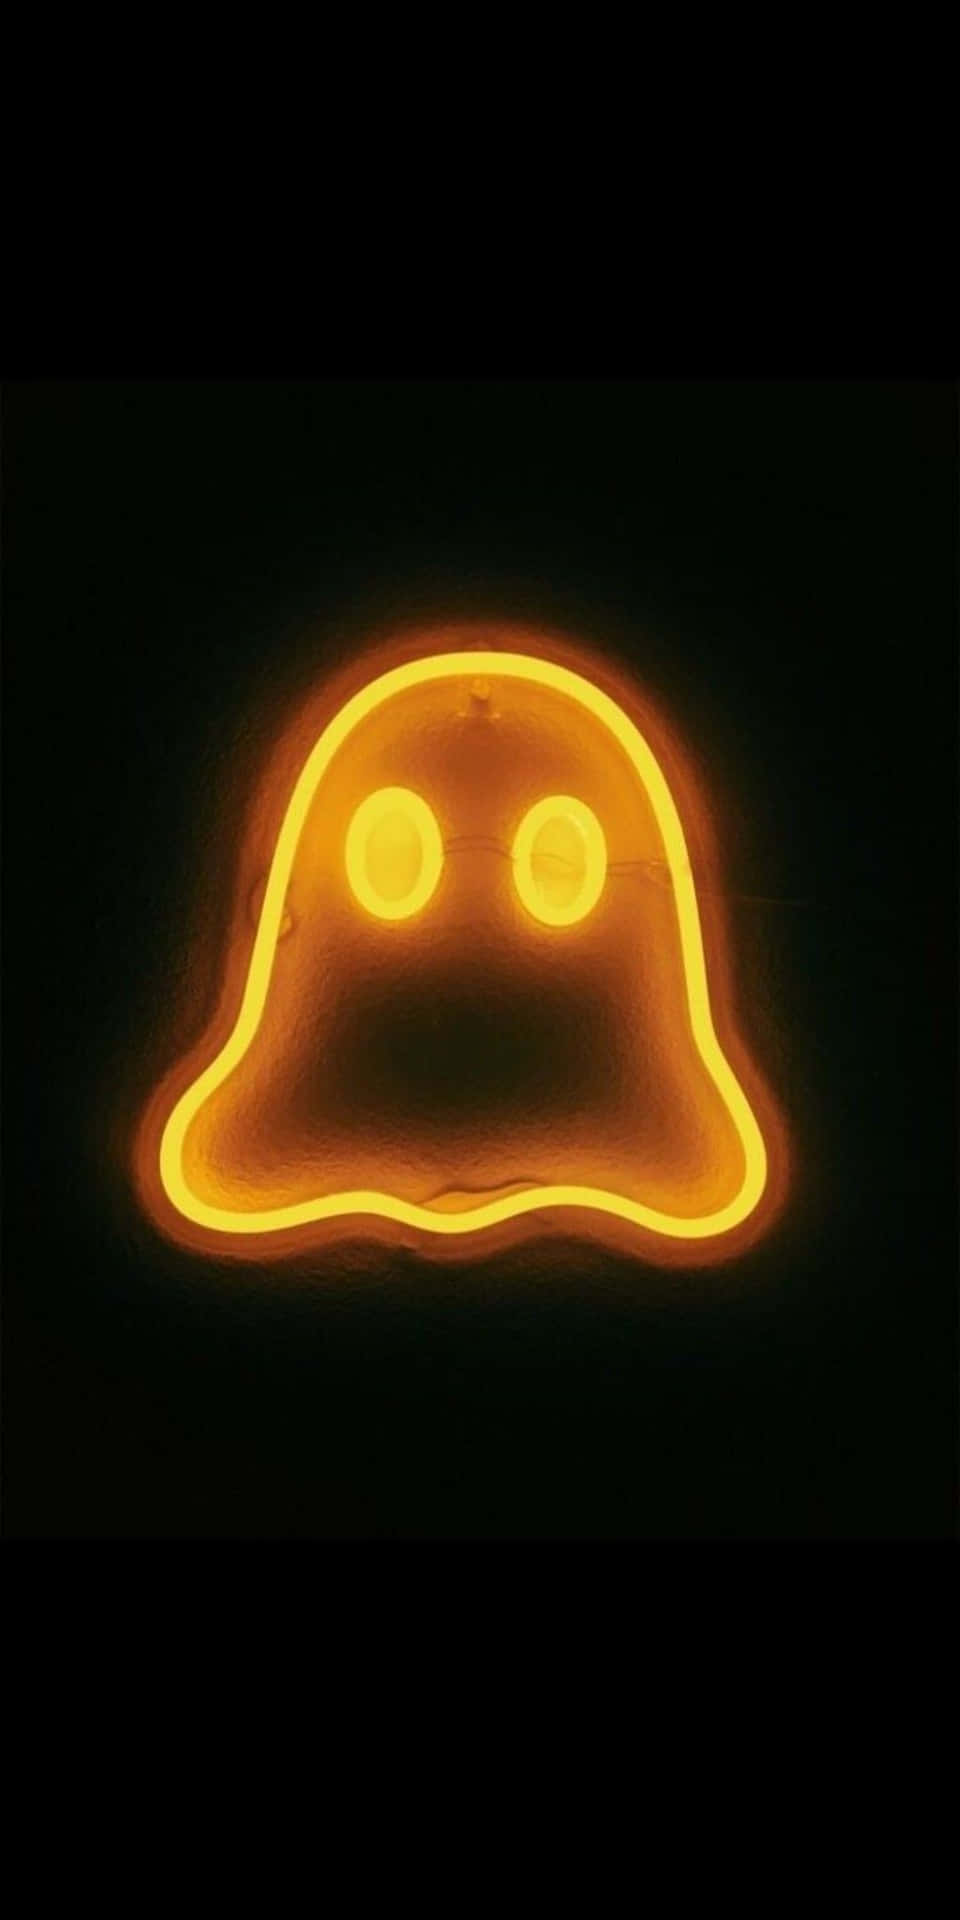 Light up your Halloween with awesome neon decorations! Wallpaper